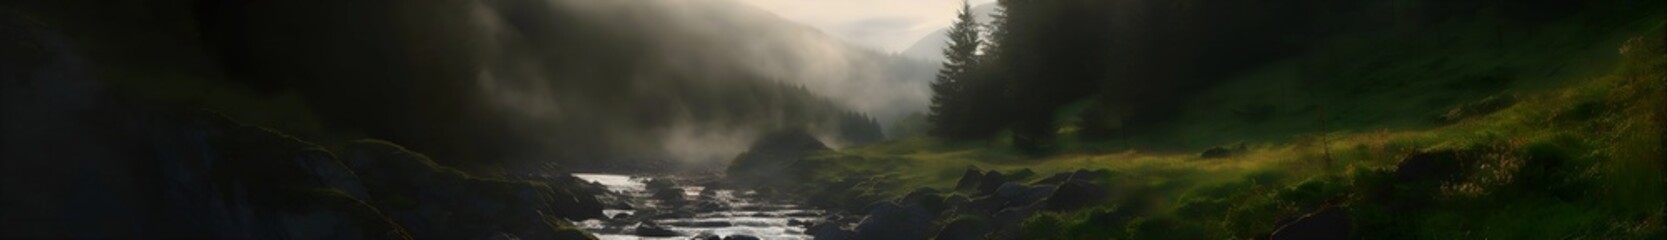 Panorama of the intermountain with a mountain river at dawn with morning fog, bare stone on the bank and slopes covered with a green forest of trees